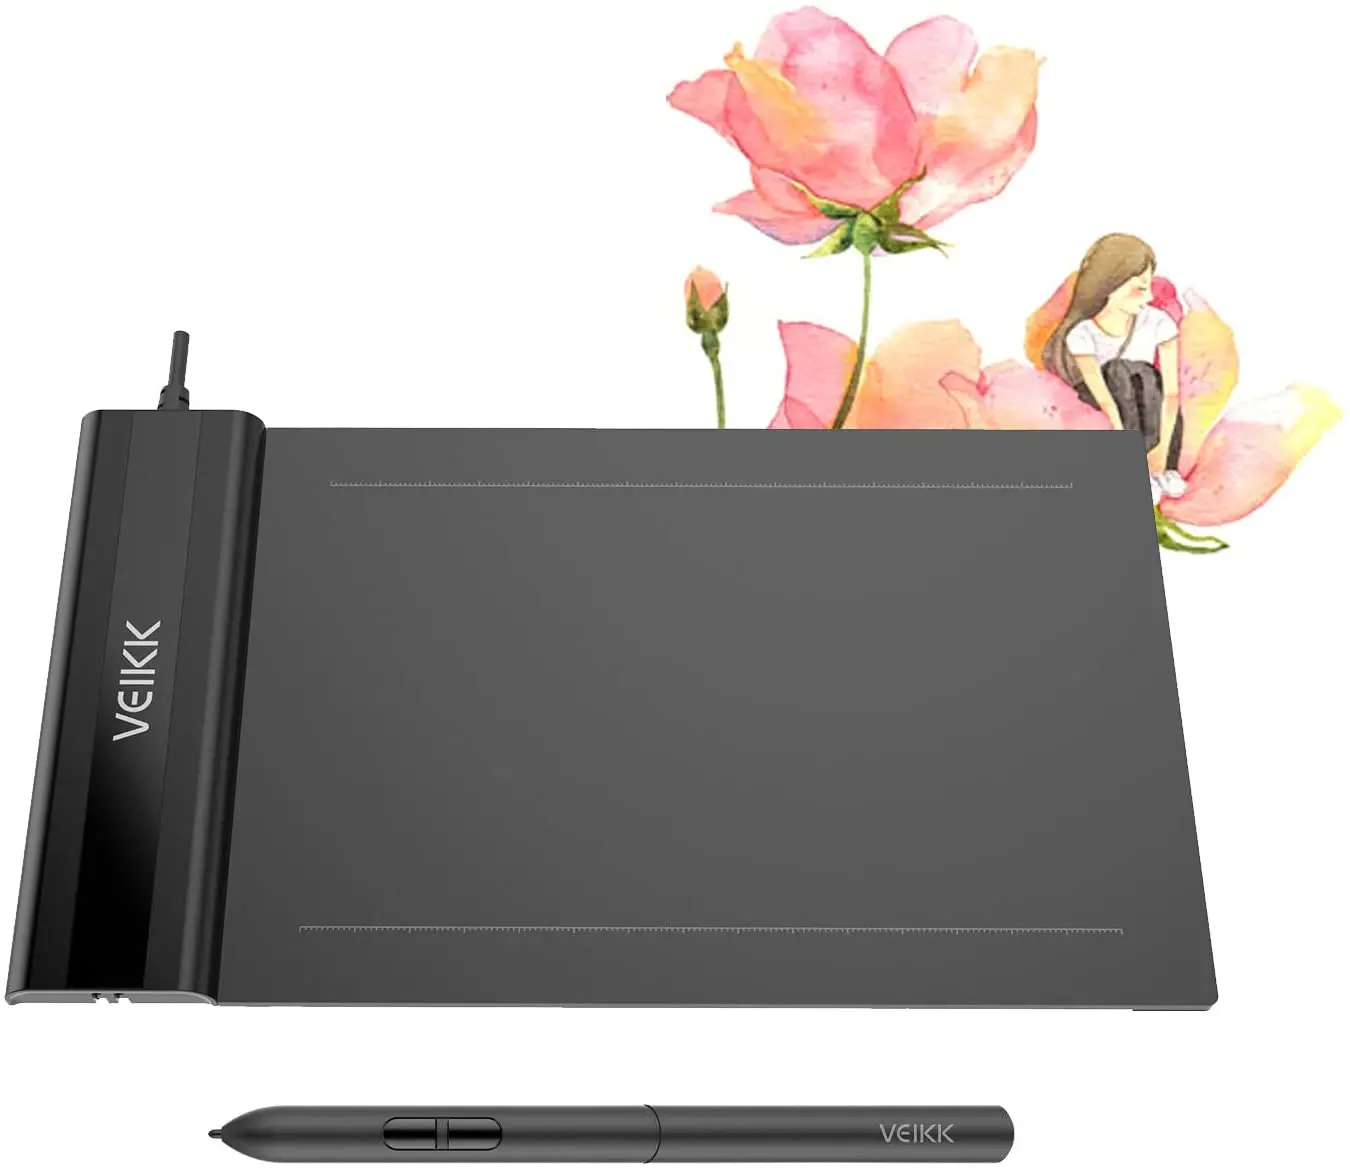 

Top Quality VEIKK S640 6 x 4 Inch 8192 Levels Battery-free Pen lcd Digital Writing Pad For Laptop,pc And Computer